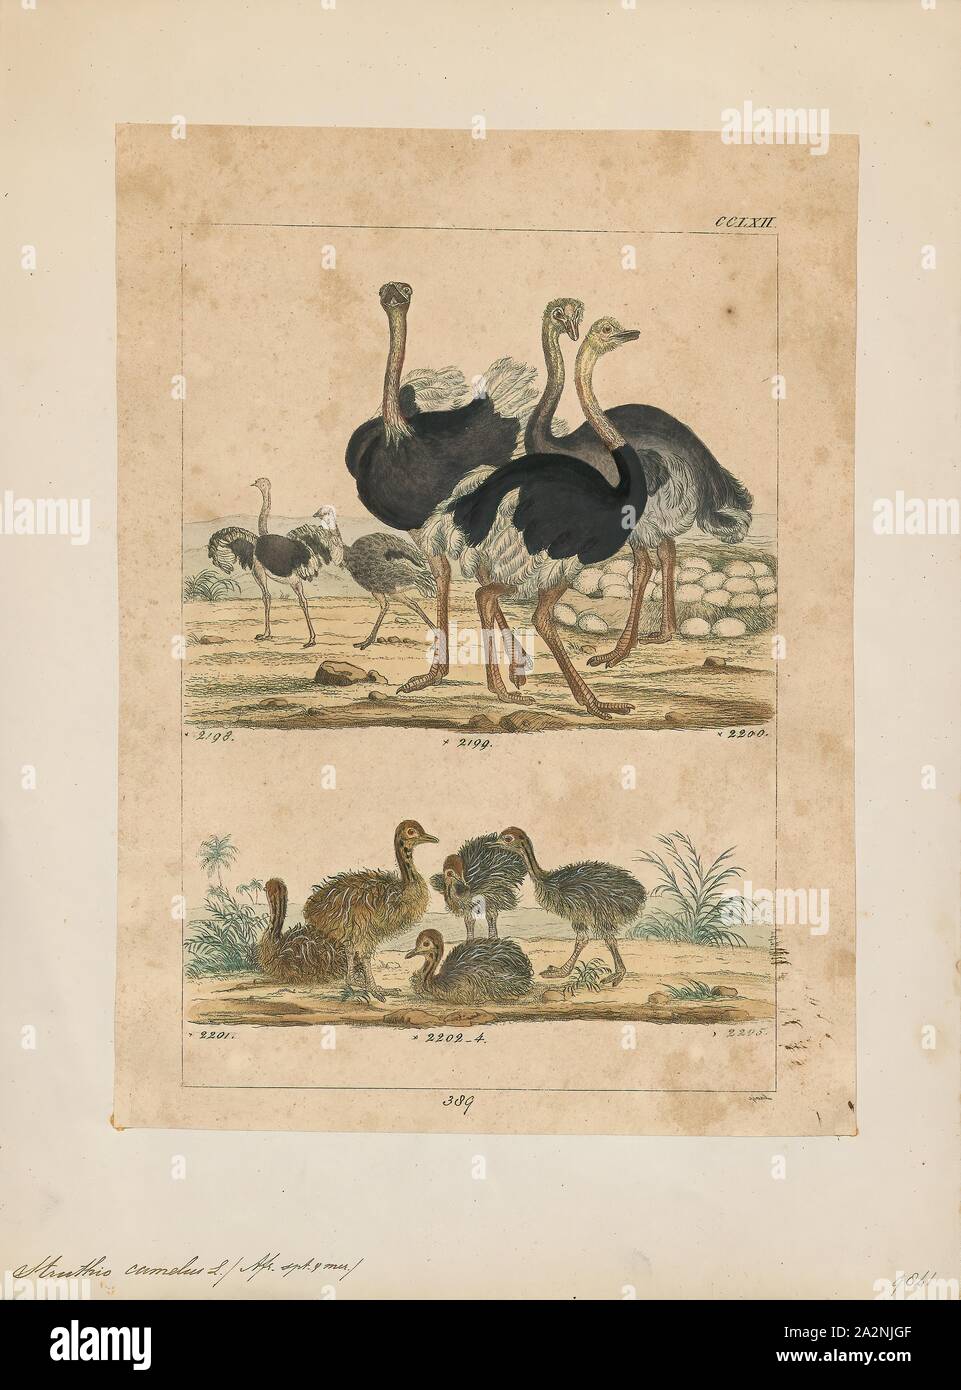 Struthio camelus, Print, The common ostrich (Struthio camelus), or simply ostrich, is a species of large flightless bird native to certain large areas of Africa. It is one of two extant species of ostriches, the only living members of the genus Struthio in the ratite order of birds. The other is the Somali ostrich (Struthio molybdophanes), which was recognized as a distinct species by BirdLife International in 2014 having been previously considered a very distinctive subspecies of ostrich., 1820-1860 Stock Photo